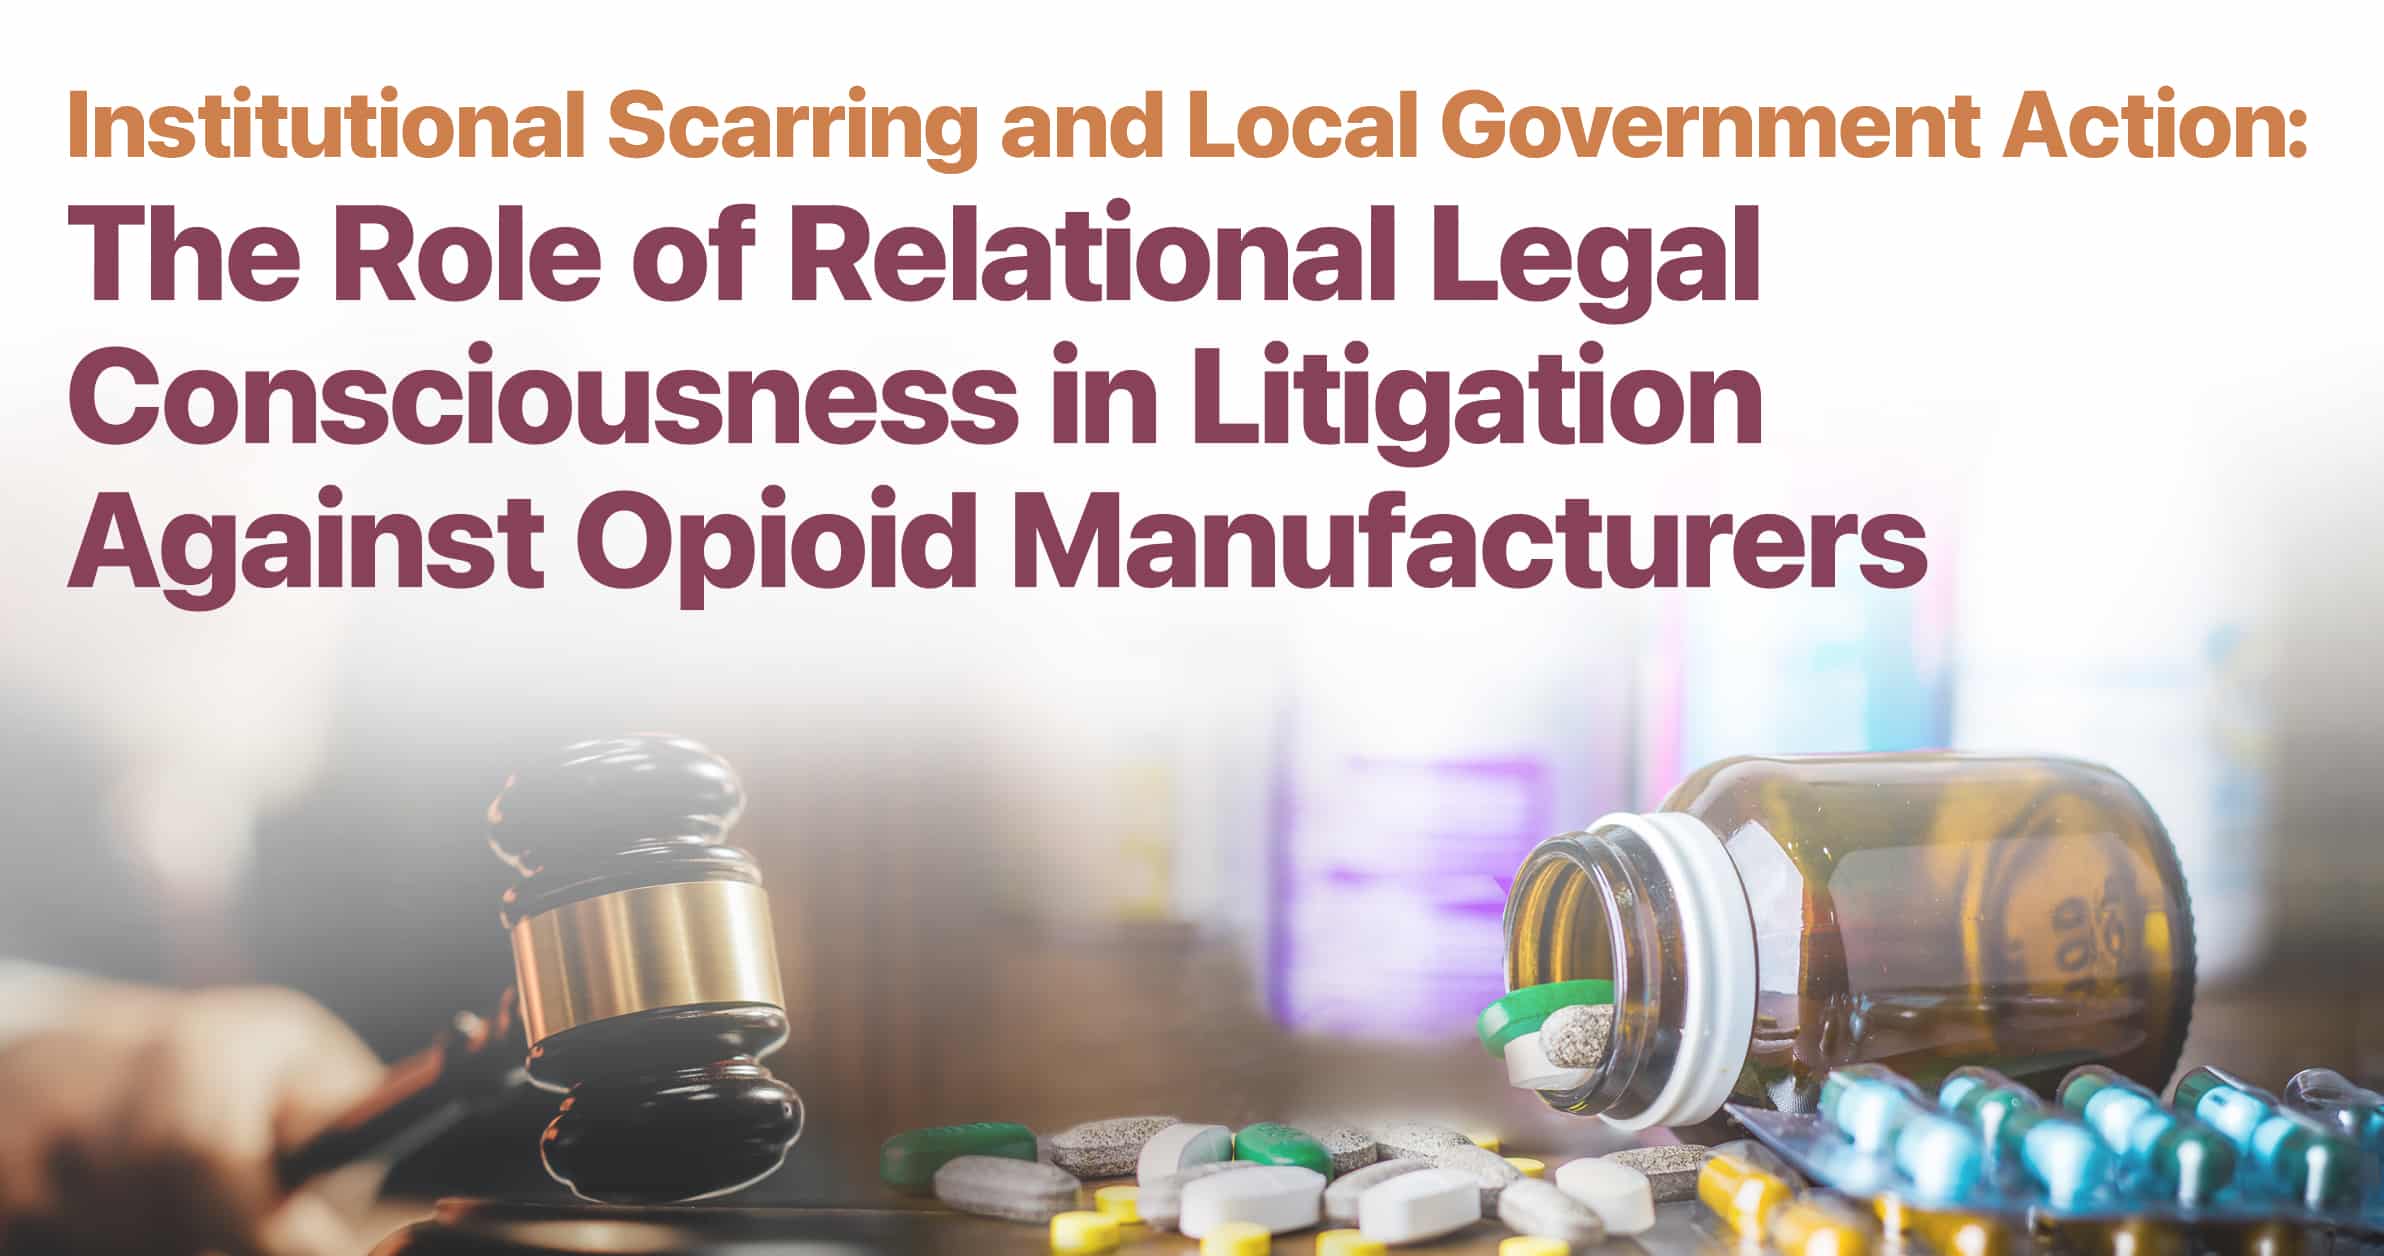 Institutional Scarring and Local Government Action: The Role of Relational Legal Consciousness in Litigation Against Opioid Manufacturers